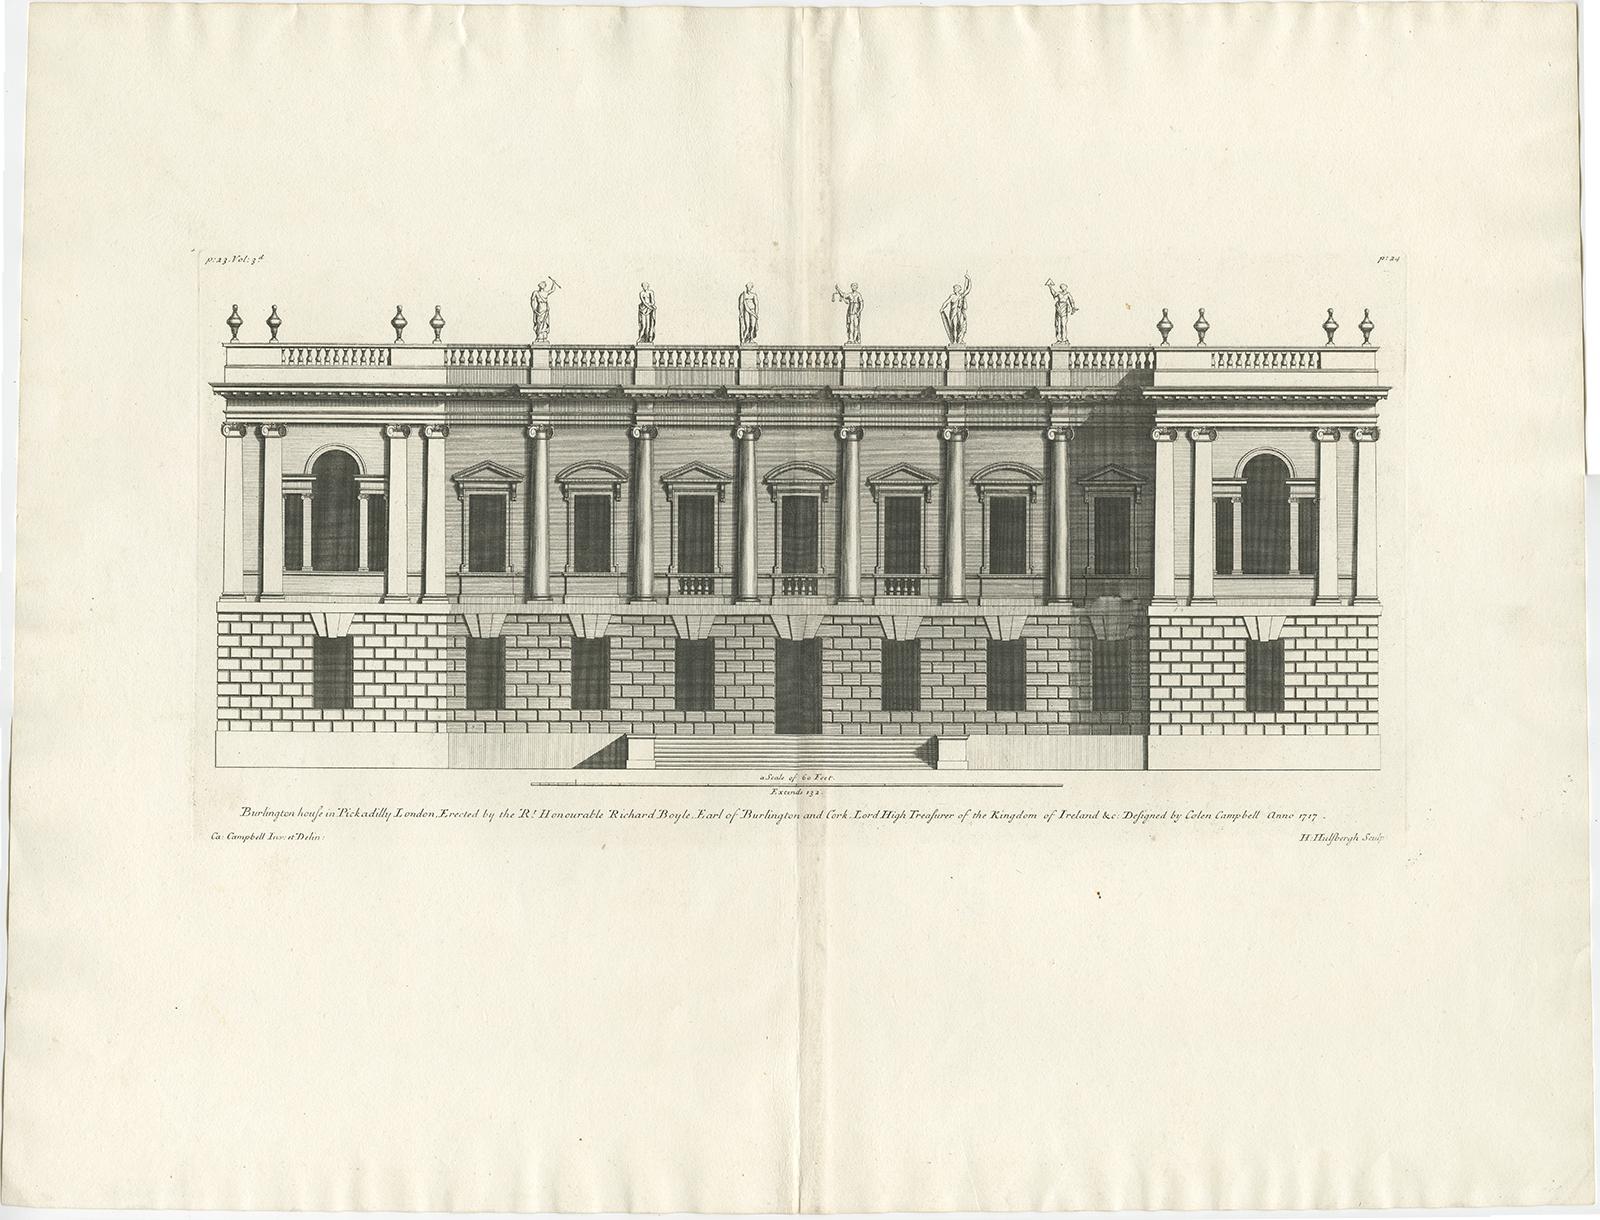 Antique print titled 'Burlington House in Pickadilly London (..)'. 

Old engraving of Burlington House, a building on Piccadilly in Mayfair, London. It was originally a private Palladian mansion owned by the Earls of Burlington and was expanded in